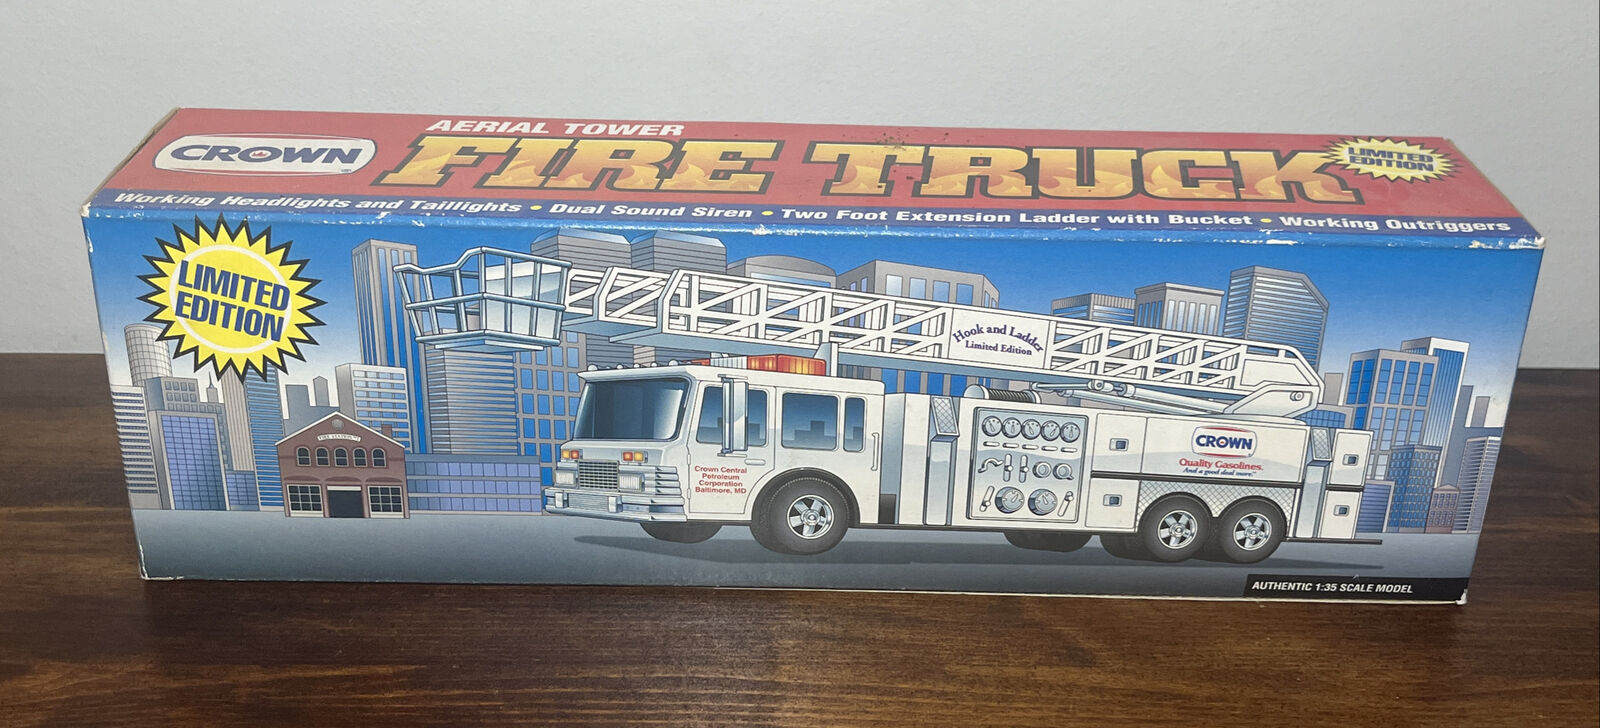 1996 CROWN AERIAL TOWER FIRE TRUCK LIMITED EDITION 1:35 Scale Model RARE